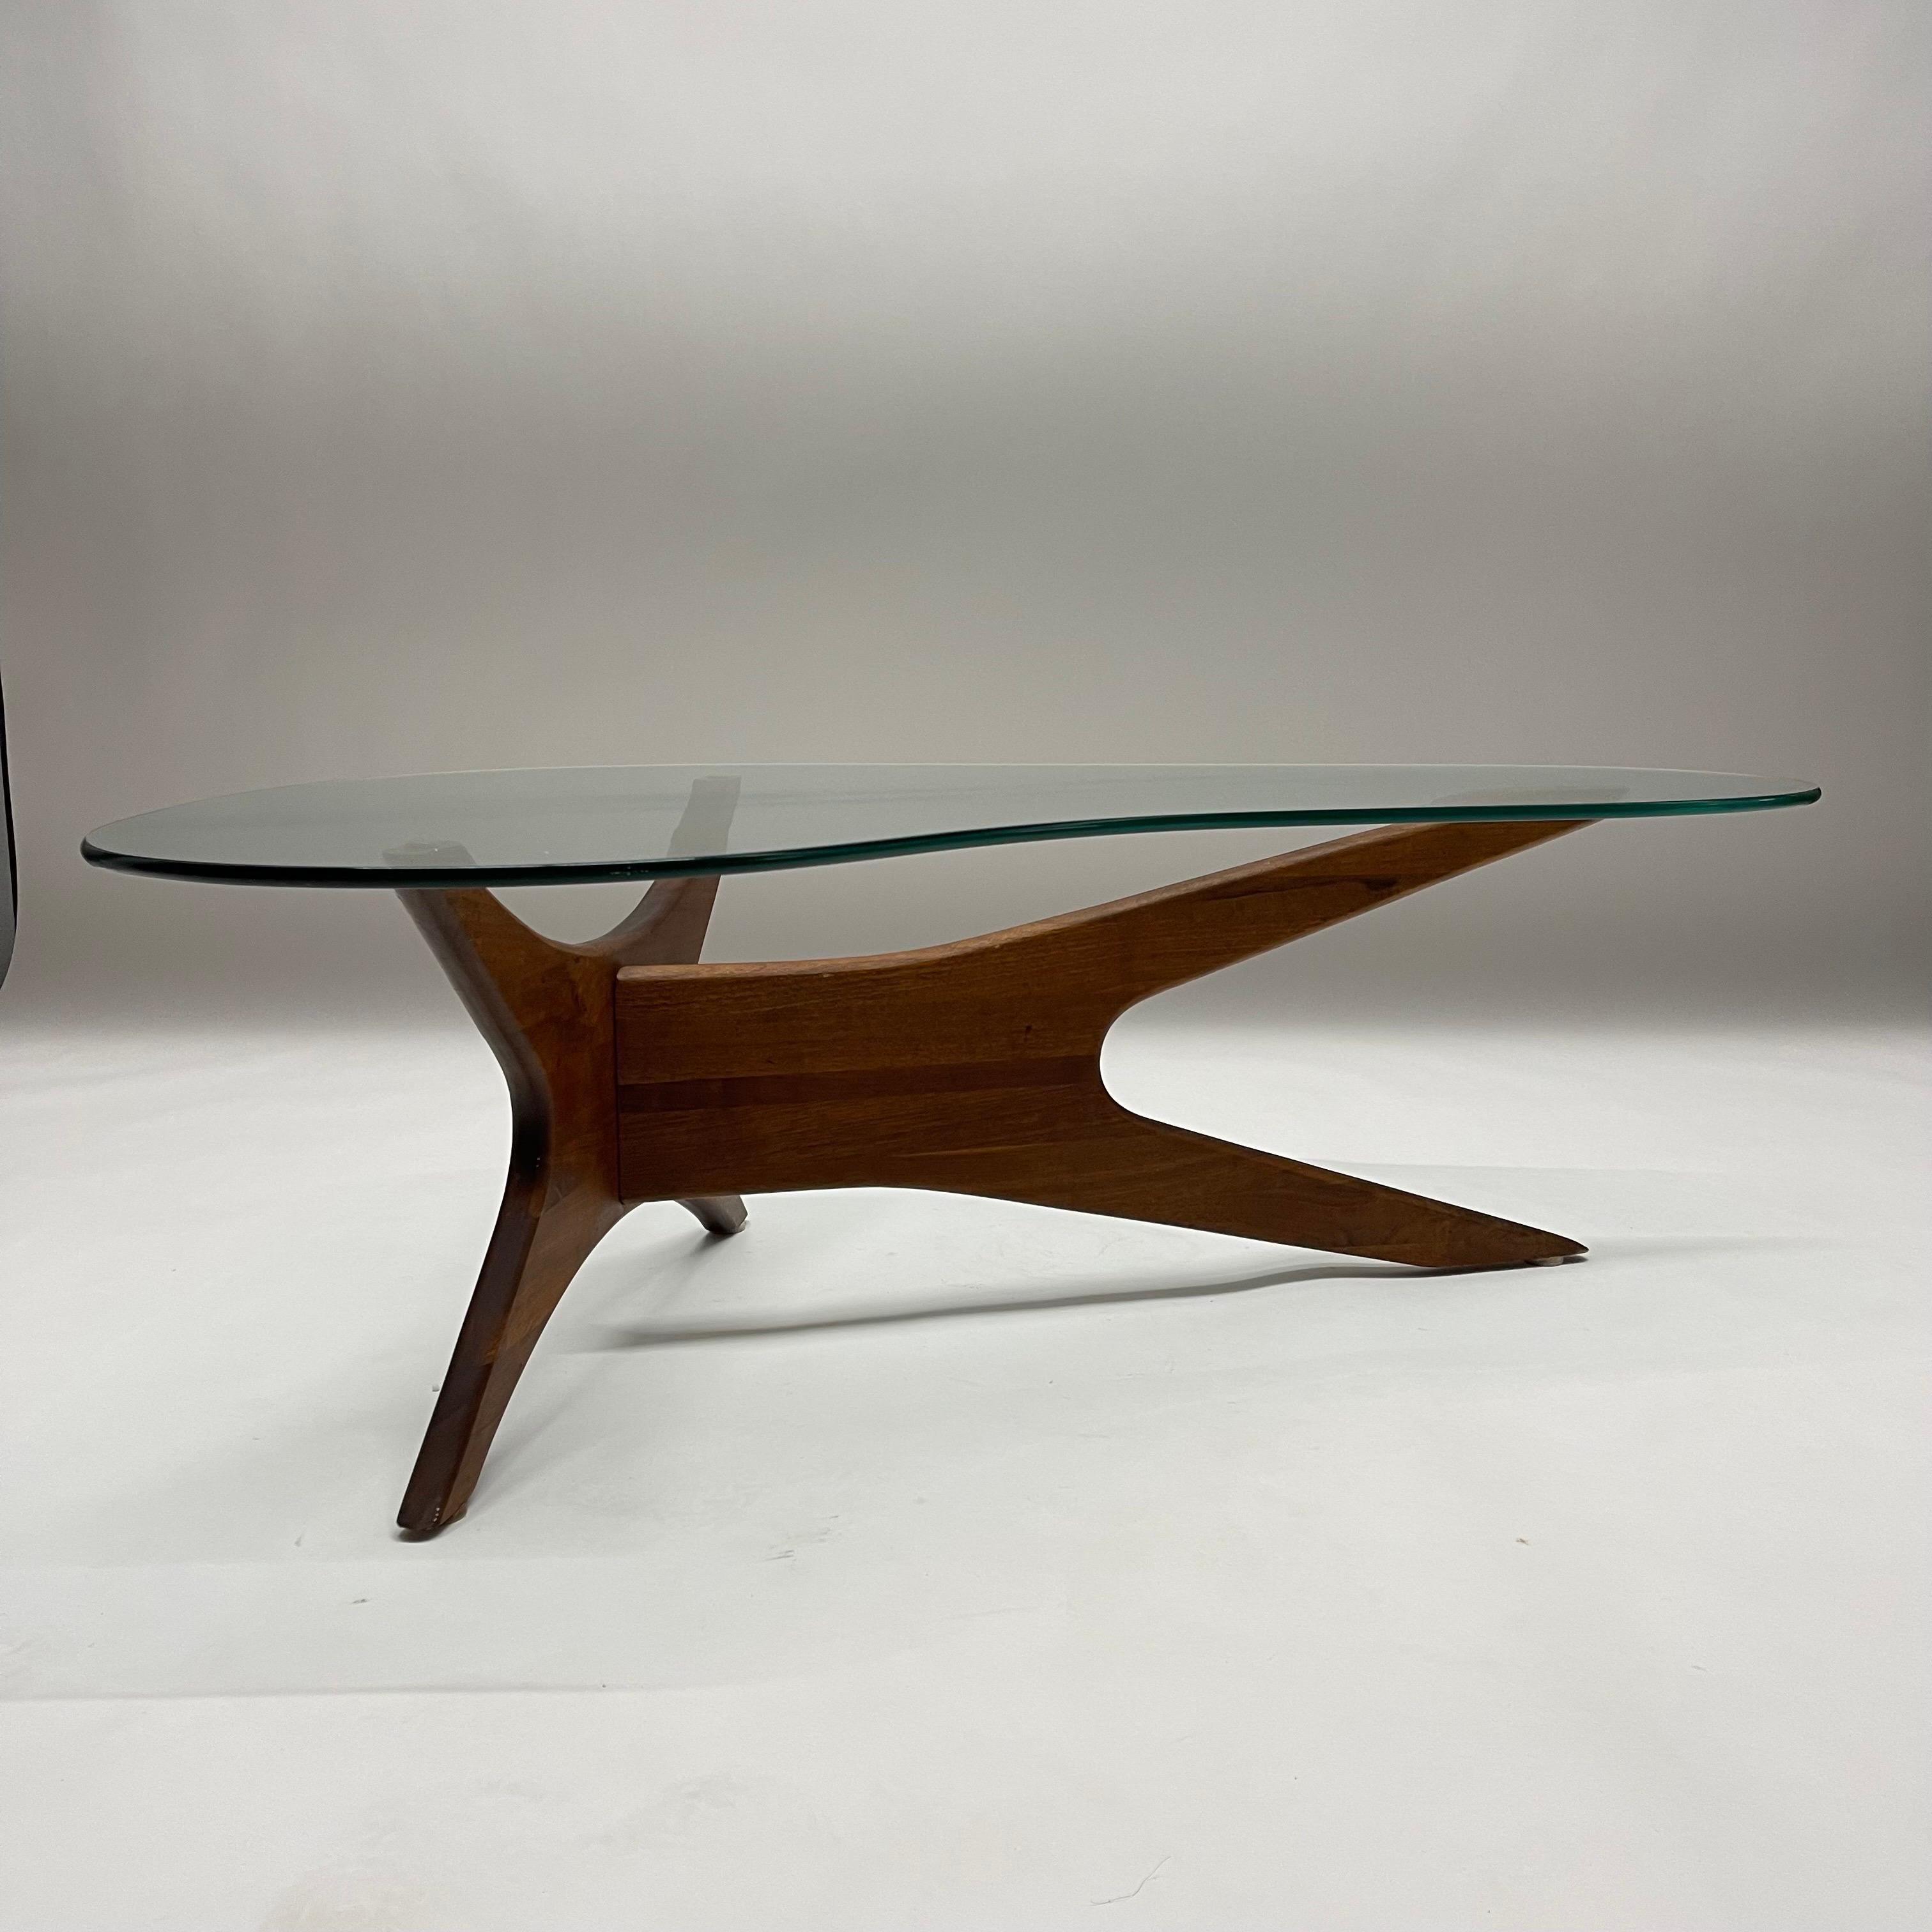 Rare Adrian Pearsall Walnut and Glass Biomorphic Kidney Coffee or Cocktail Table 1